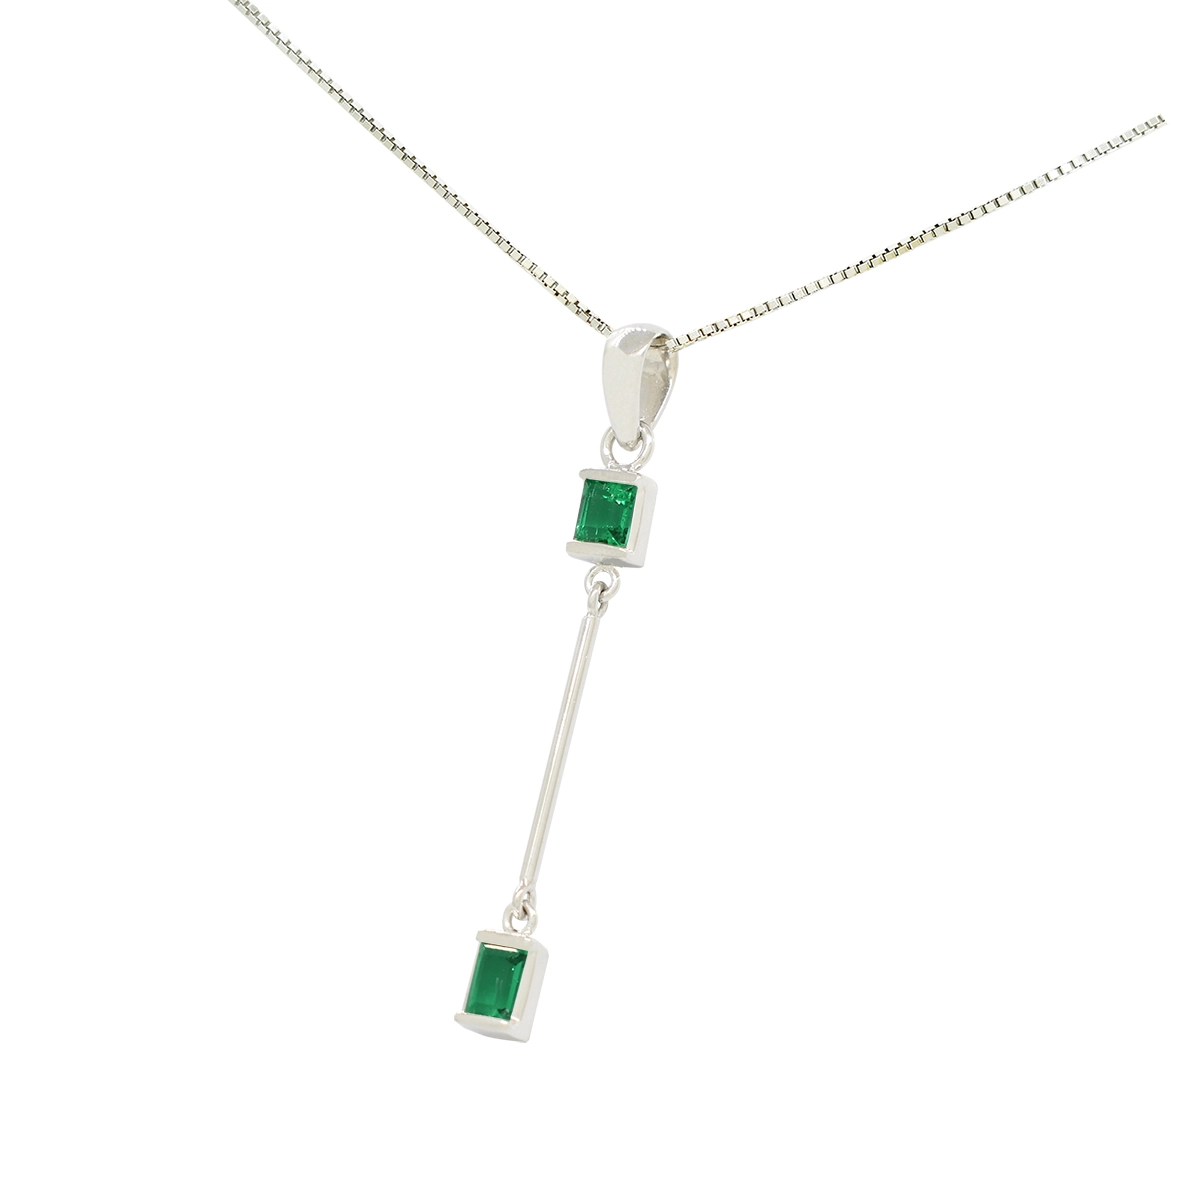 Fine emerald pendant with dark and brilliant green color real Colombian emeralds set in half bezels, one at the top and one at the bottom of a thin 18K white gold pole